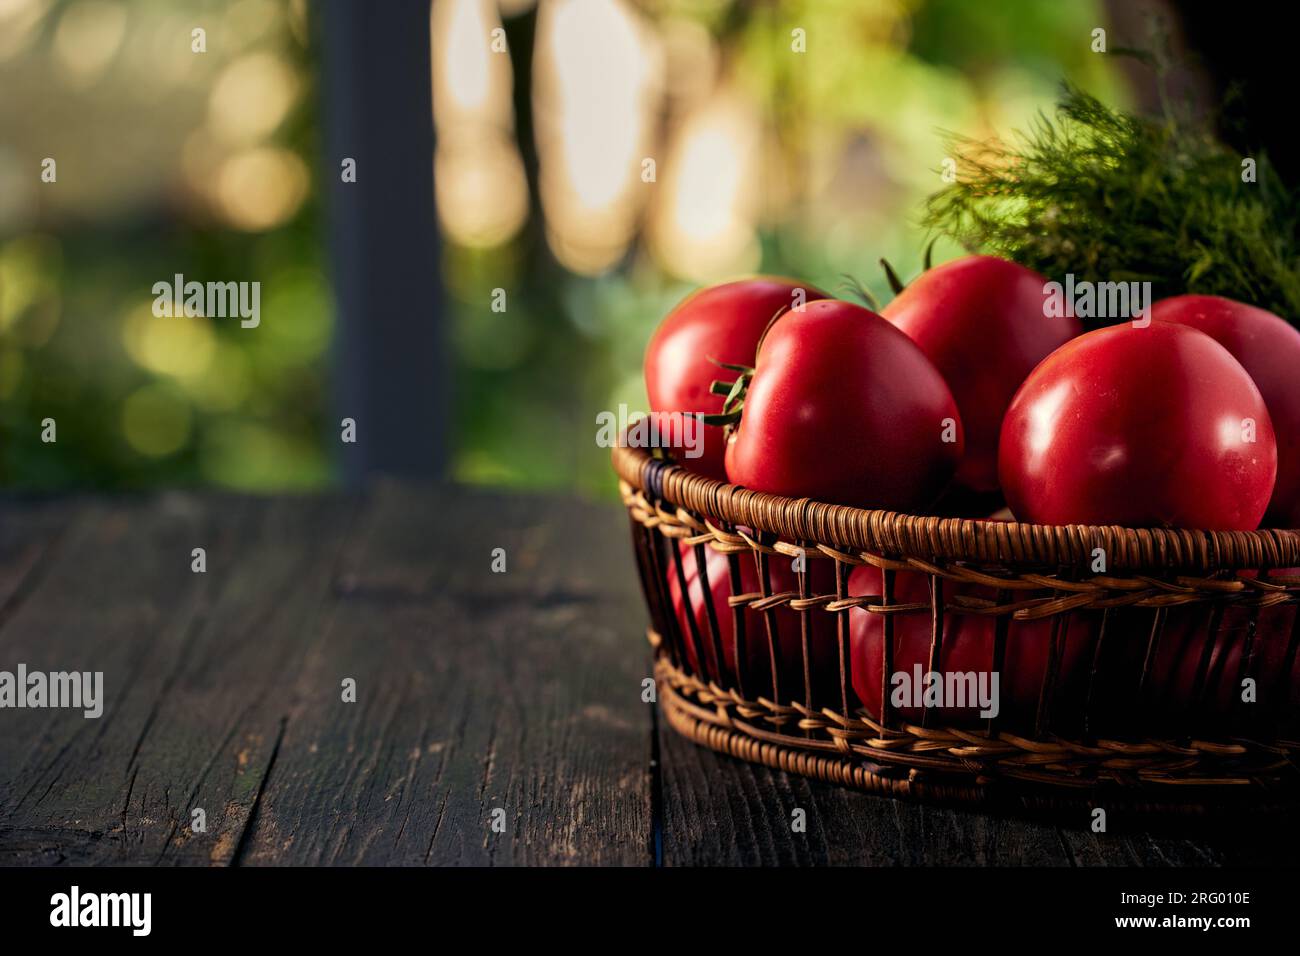 Red tomatoes in a wooden basket on a wooden table with a window in the background Stock Photo